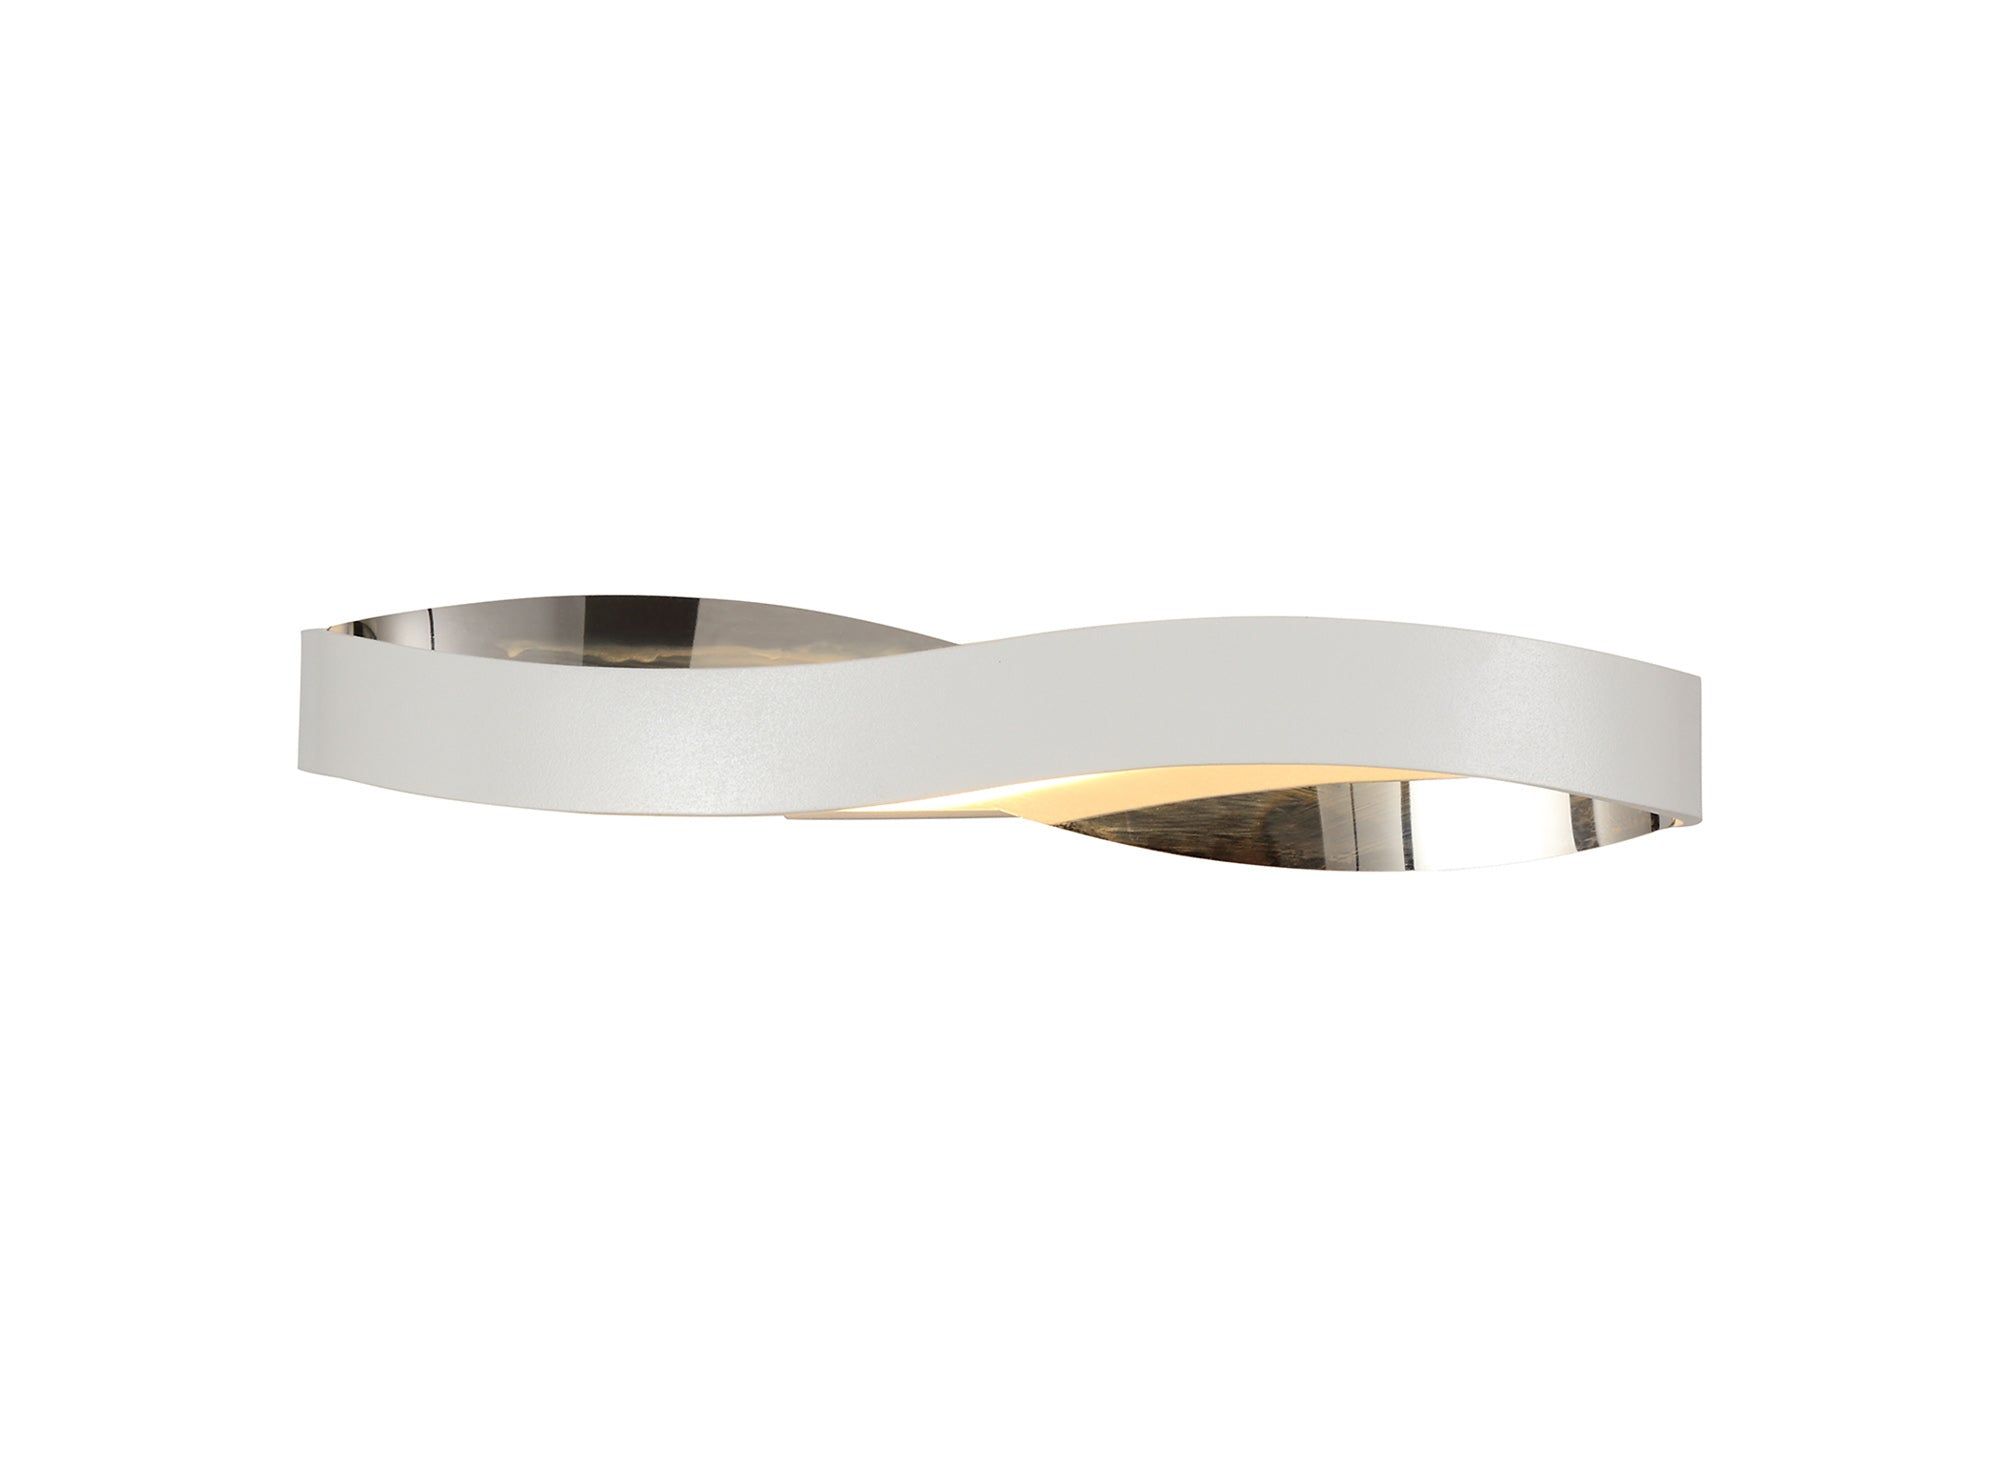 Realm Wall Lamp, 1 x 6W LED, 3000K, 420lm, Sand Anthracite/Satin Nickel, Sand White/Polished Chrome, 3yrs Warranty